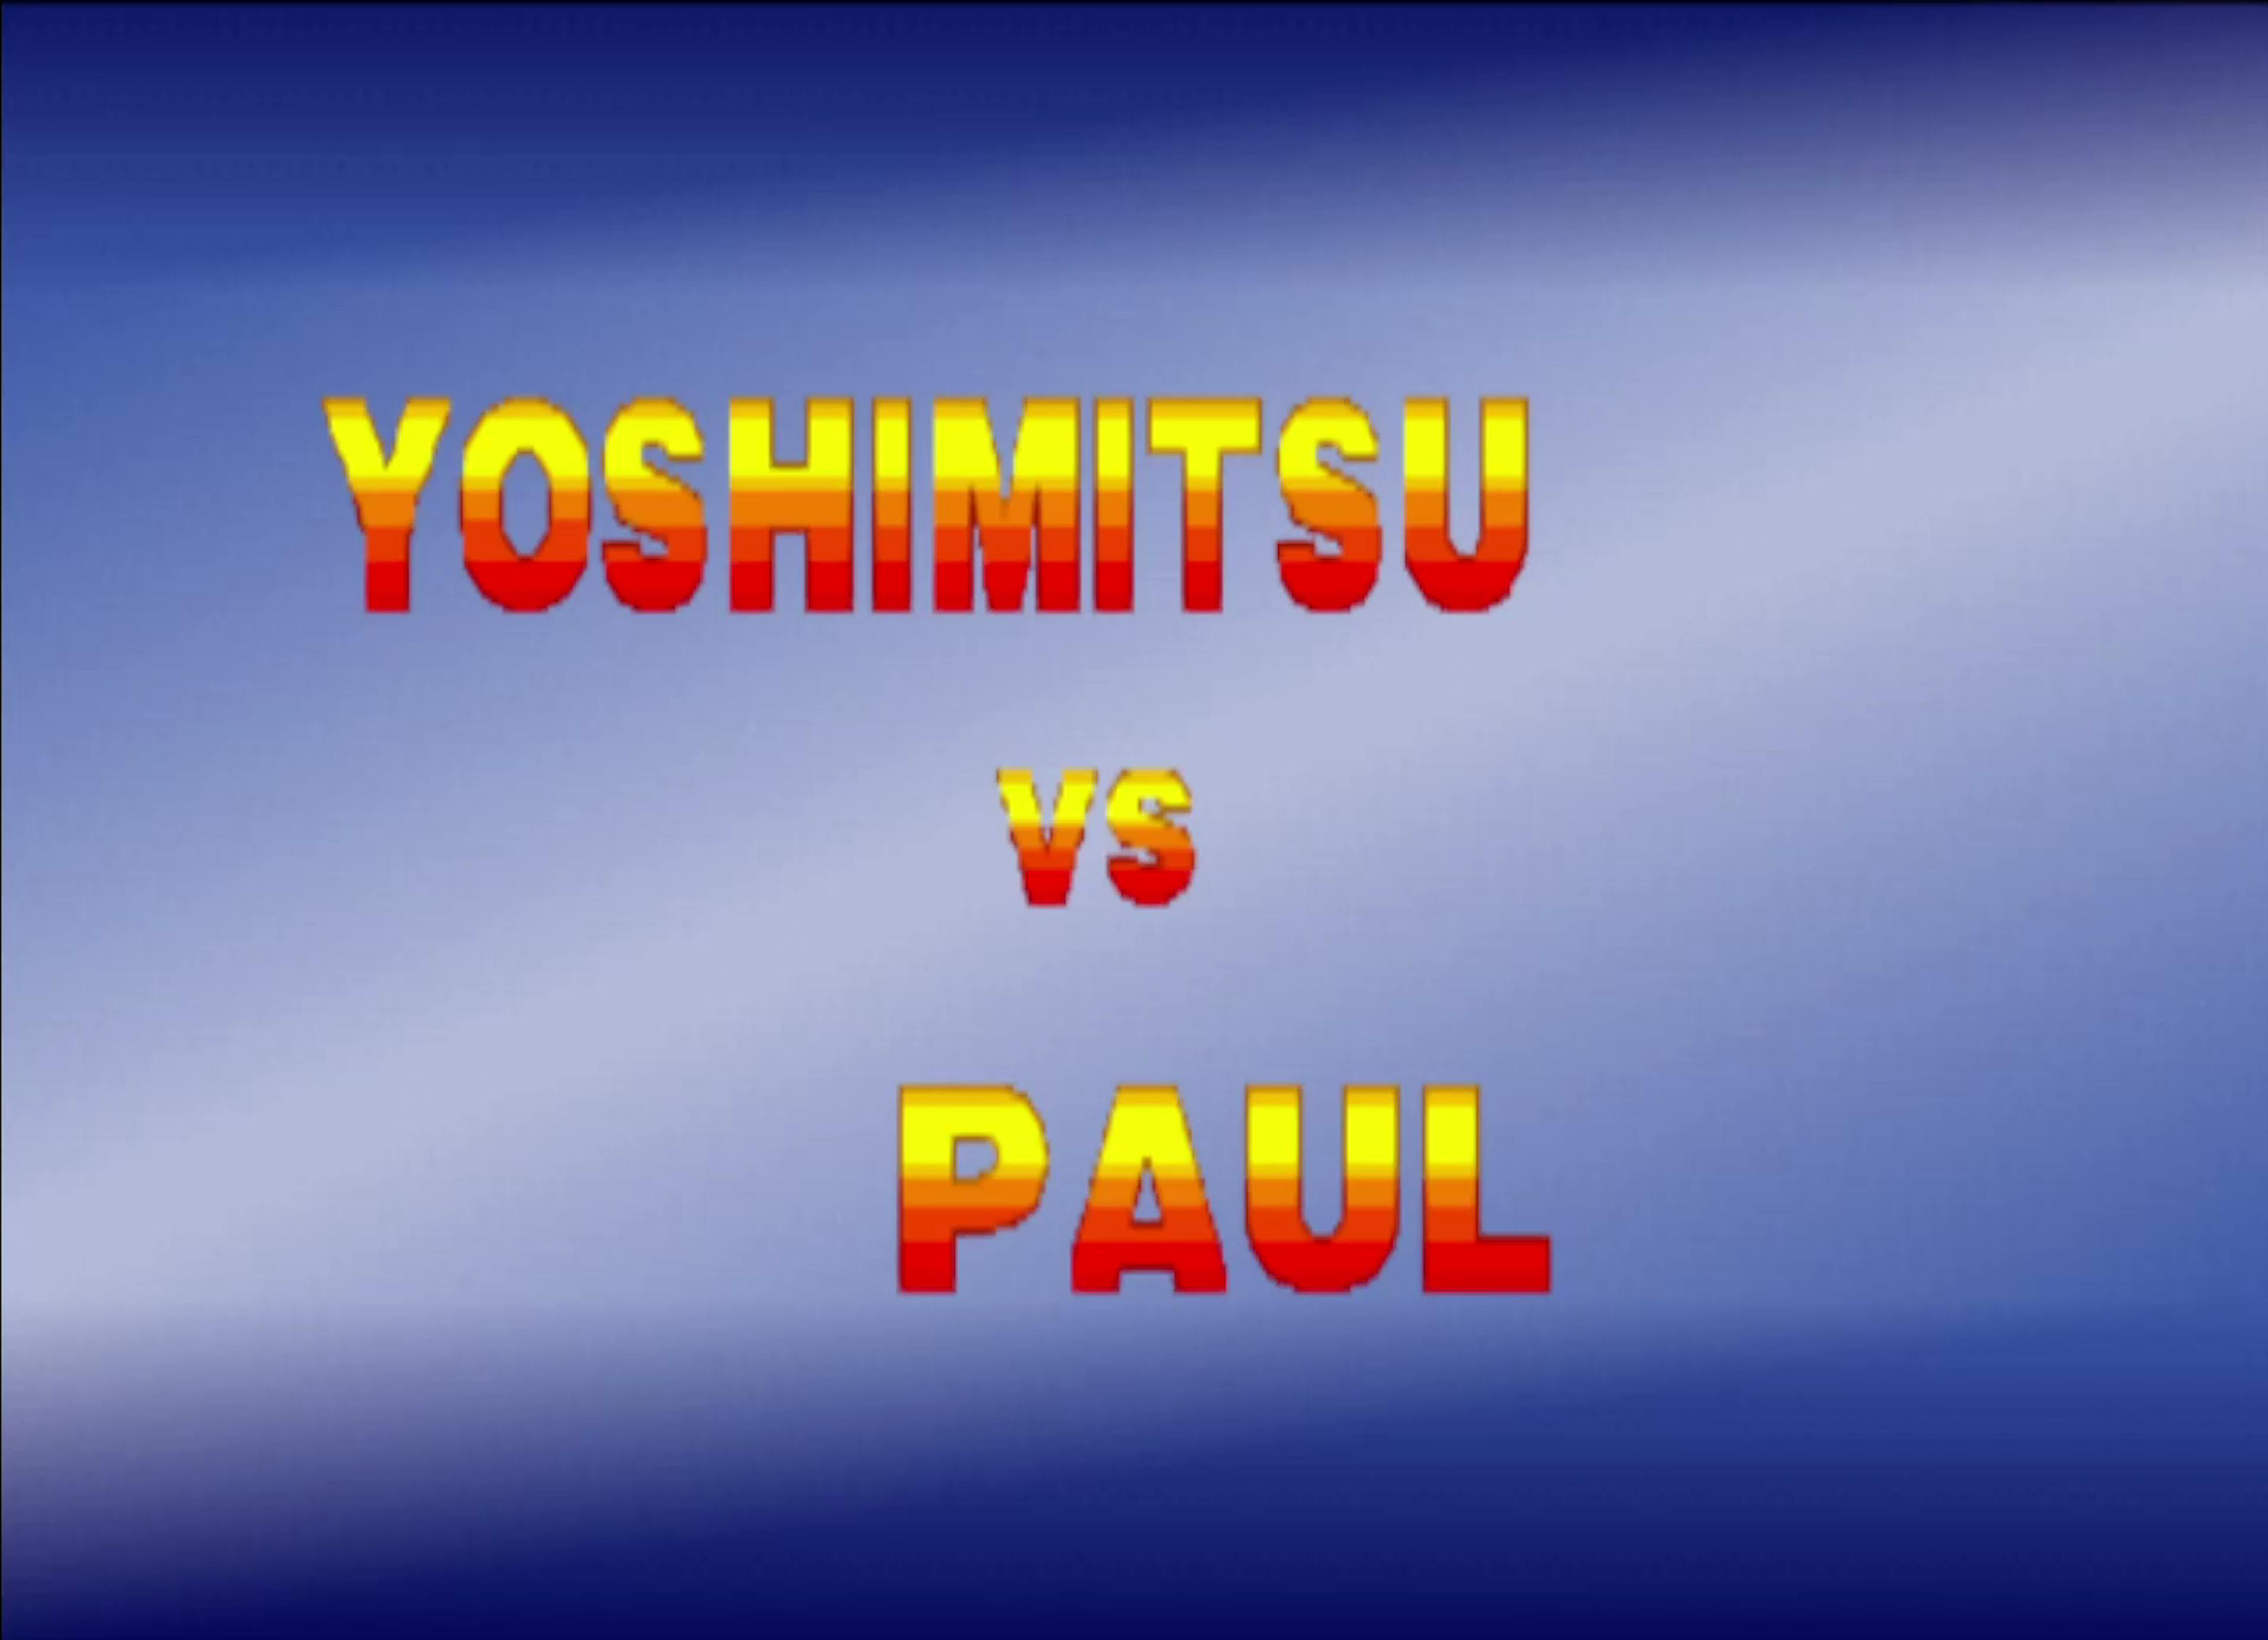 Pretty dull versus screen, especially when compared to Street Fighter 2 or Mortal Kombat.